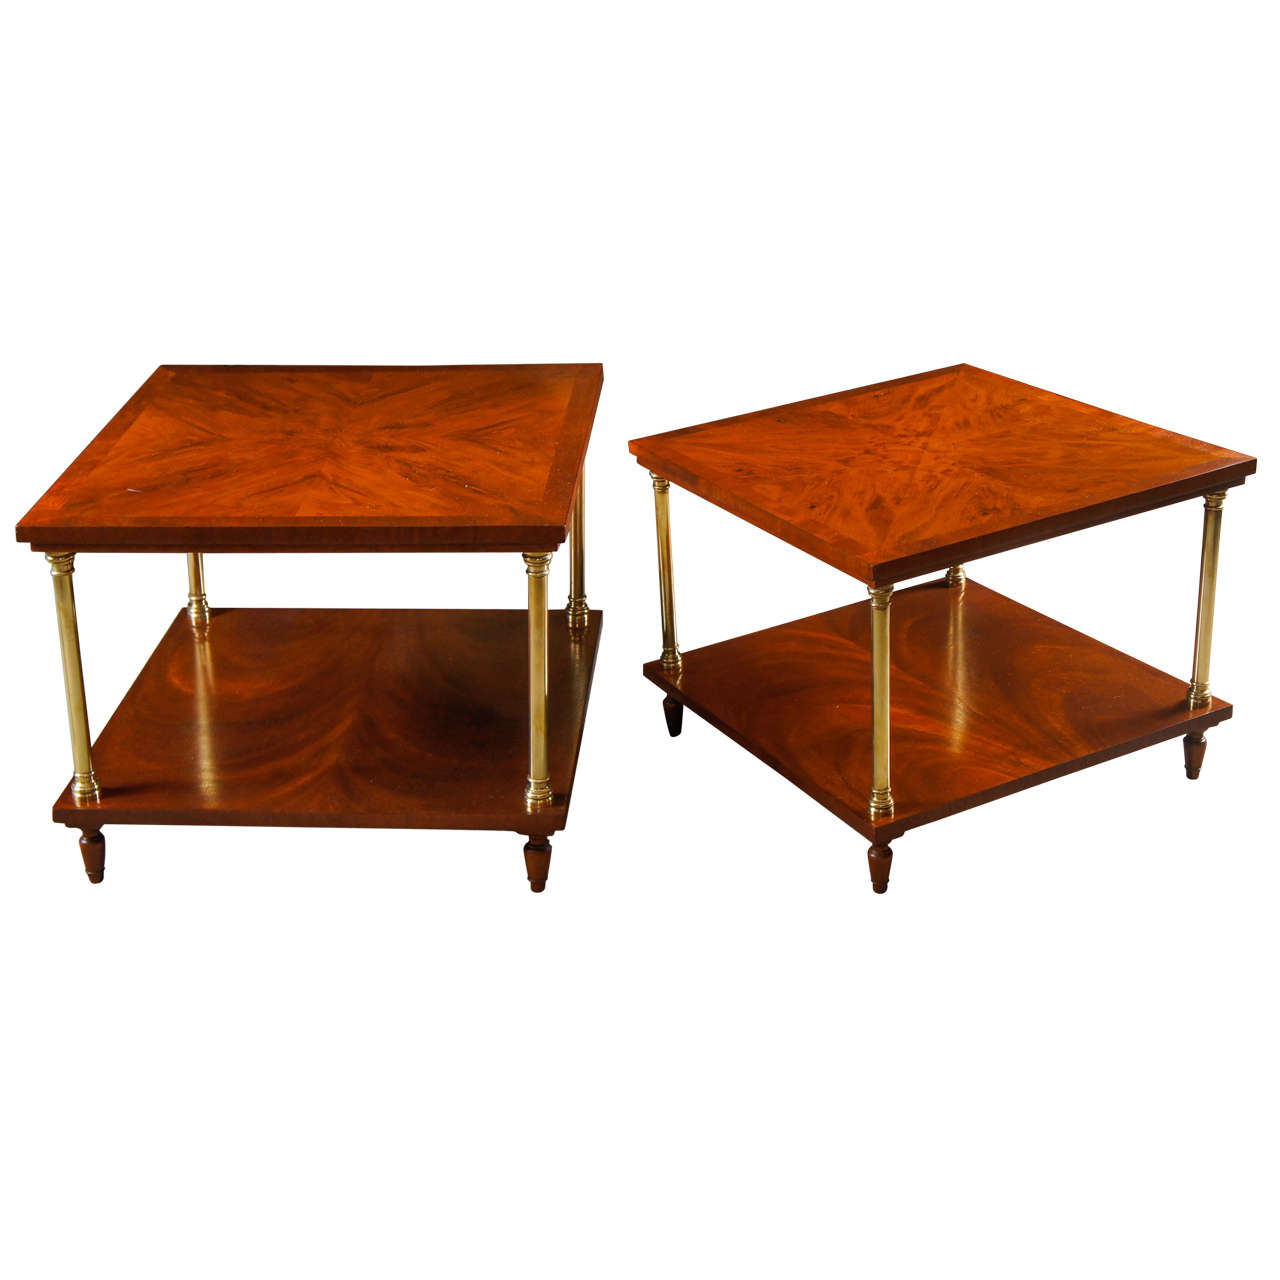 Pair of Yew Wood Side Tables